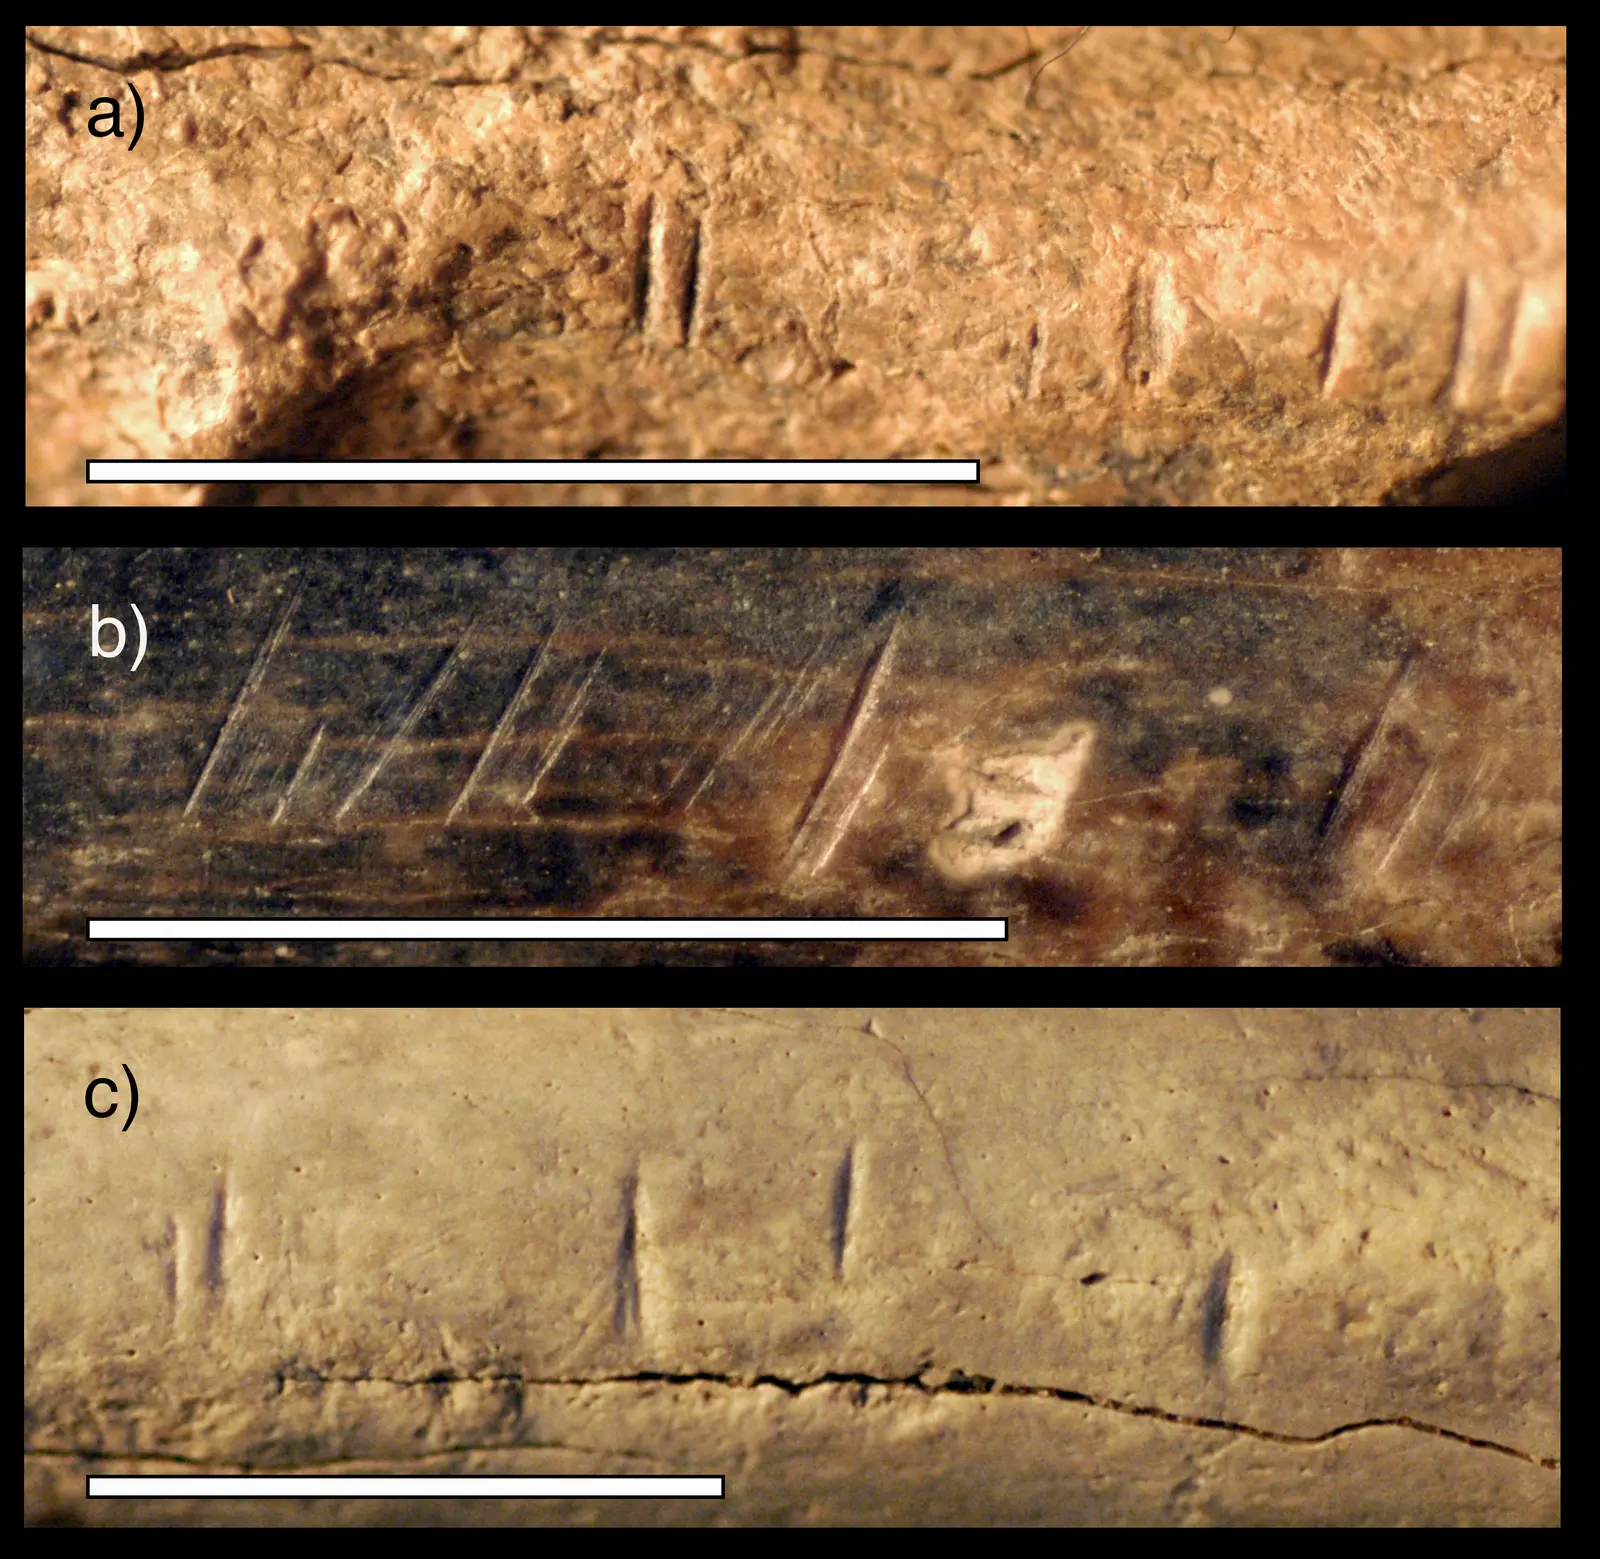 Three fossilized animal bones from the same region and time horizon as the newly analyzed tibia show similar butchery marks